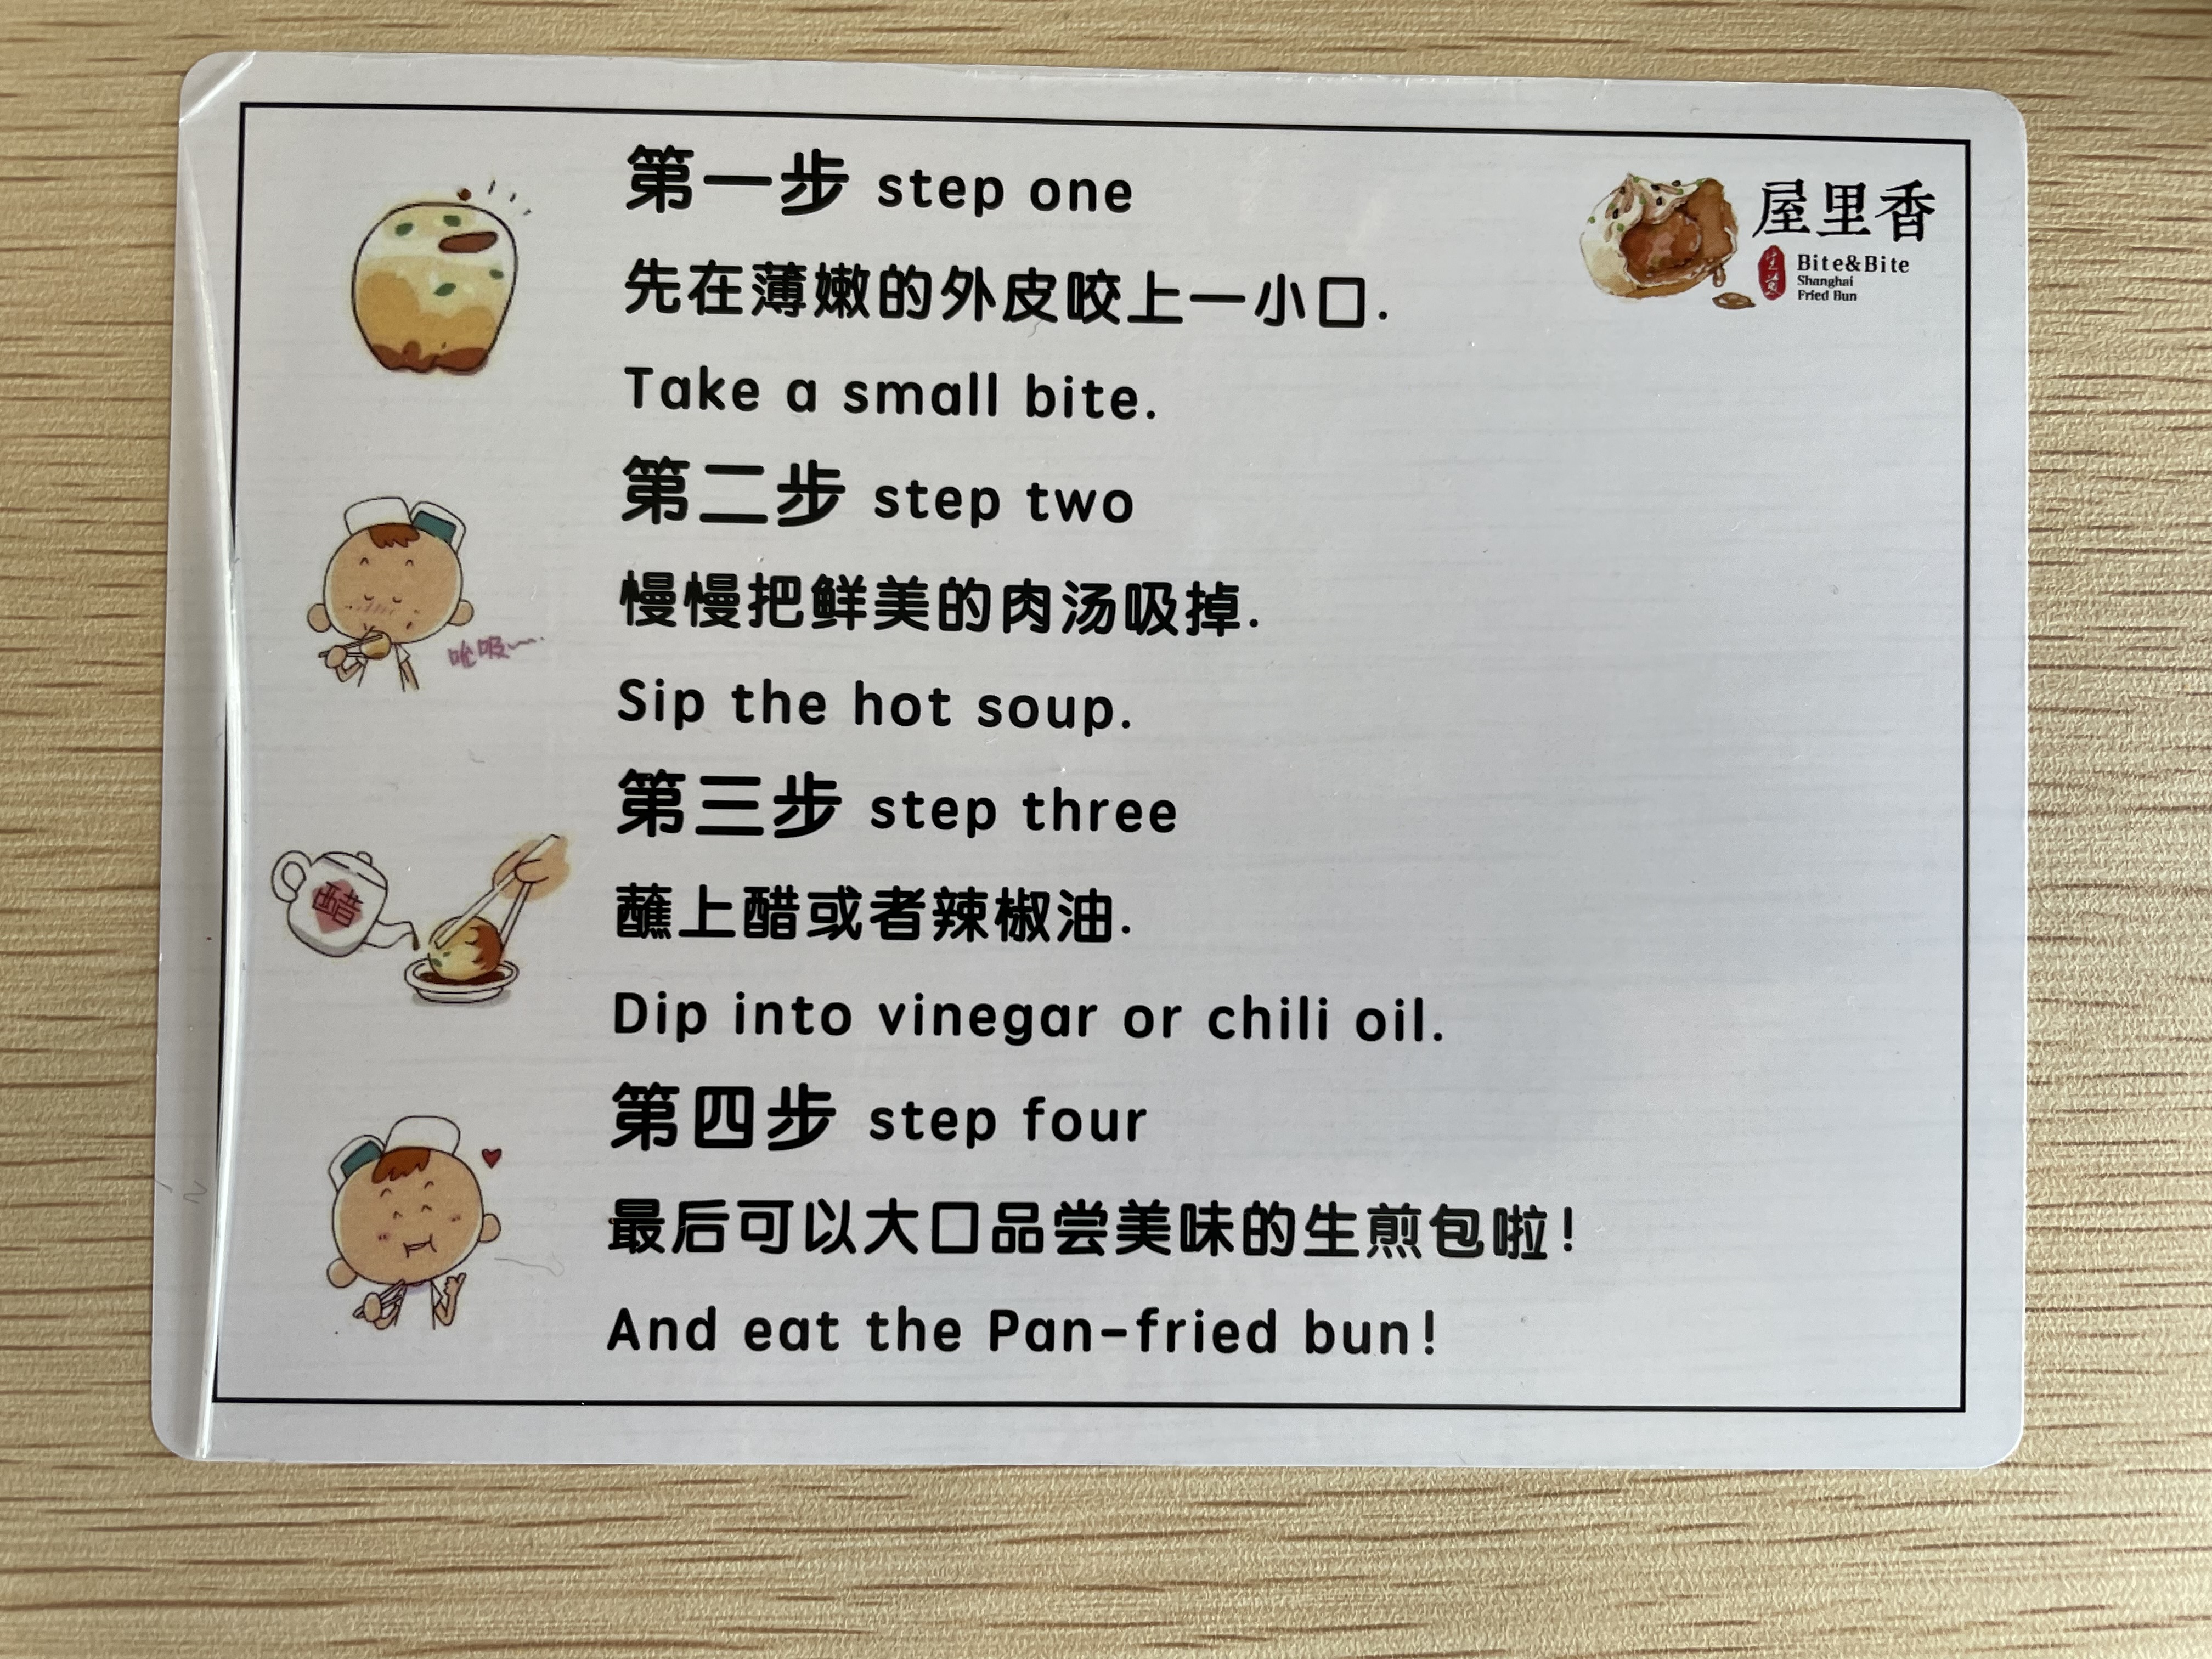 We got excited when we saw our tables had instructions on how to eat the buns